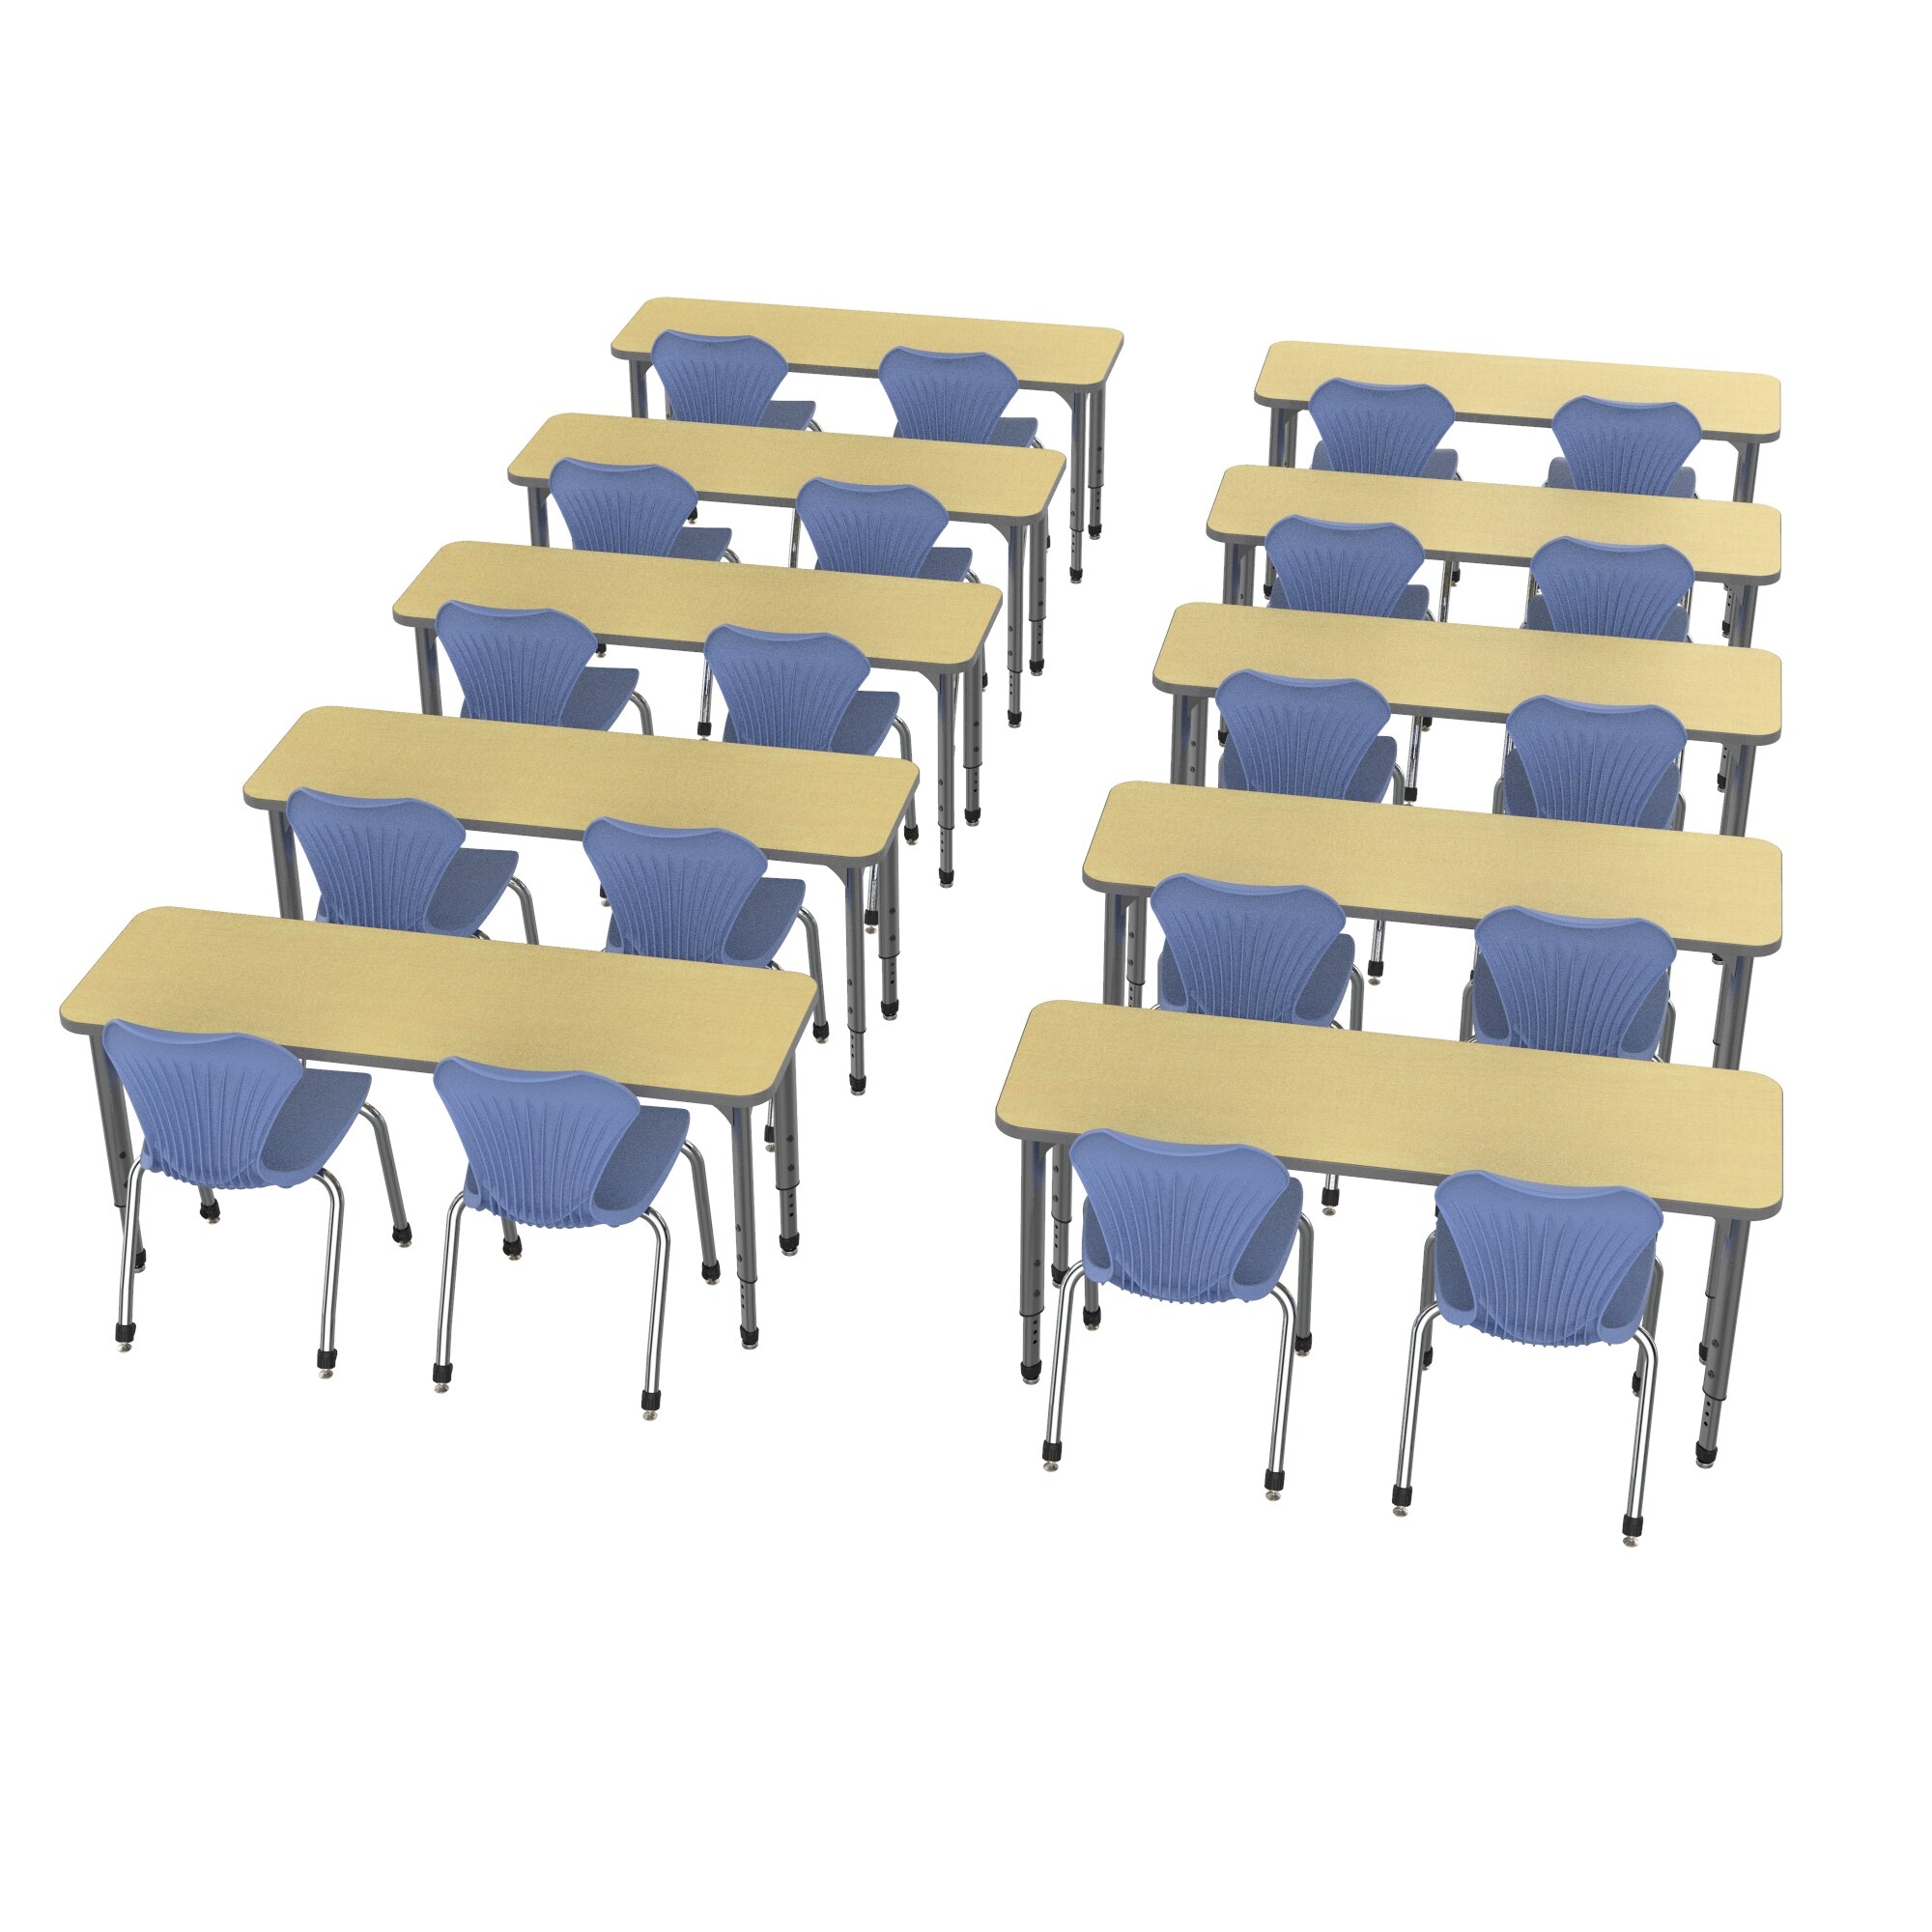 Marco Group Classroom Set 10 Multi Student Desks 20 Chairs